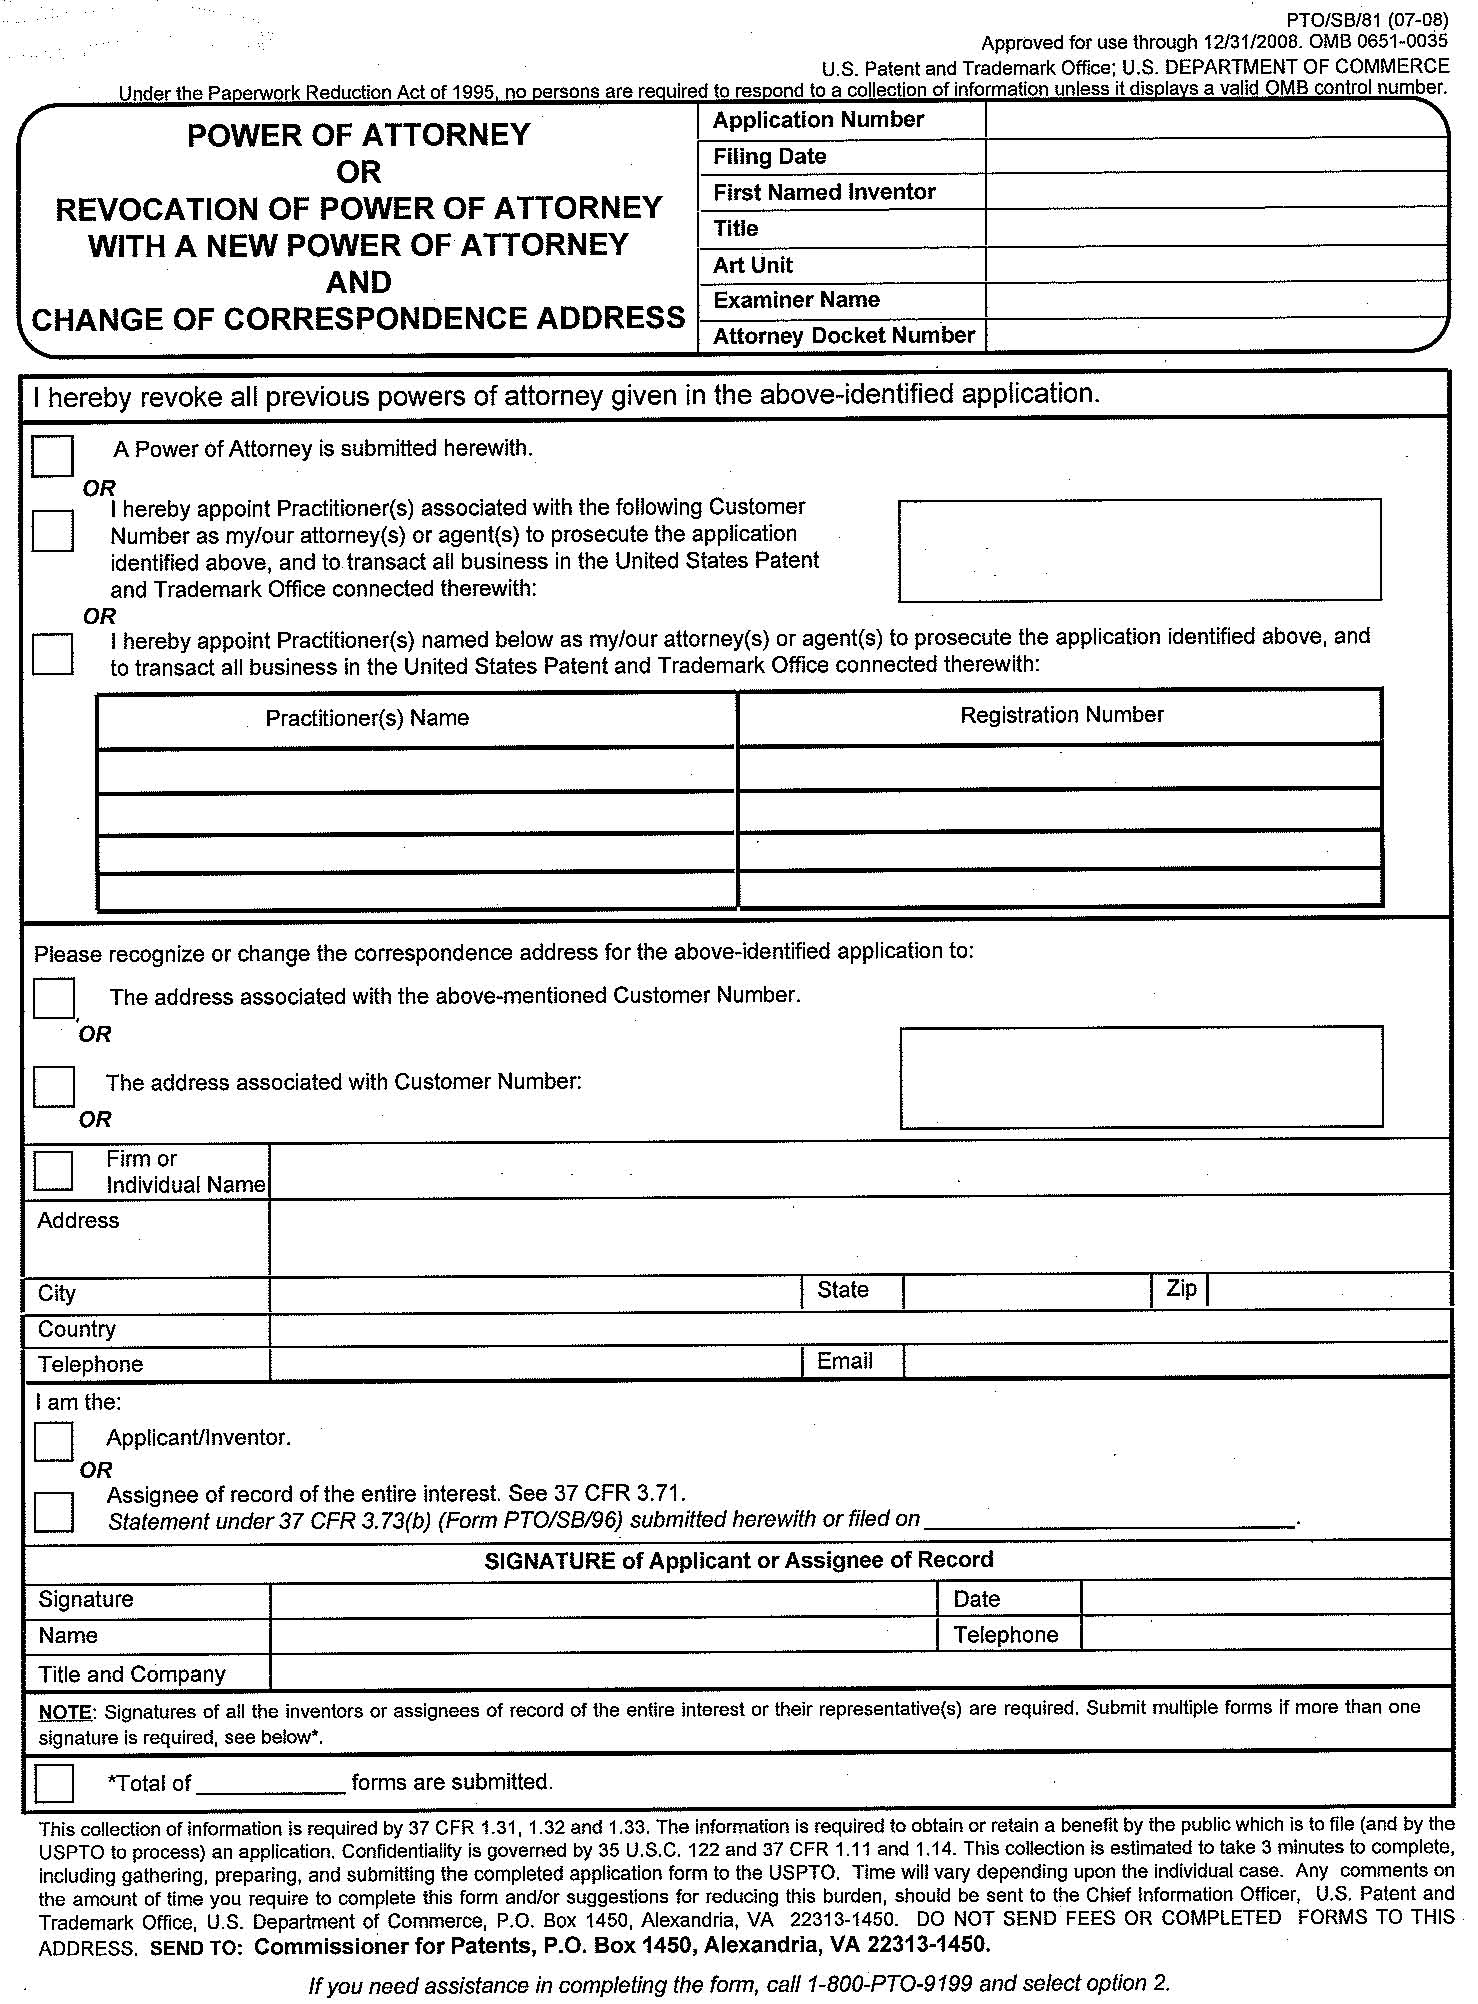 form pto/sb/82 revocation of power of attorney with new power of attorney and change of correspondence address